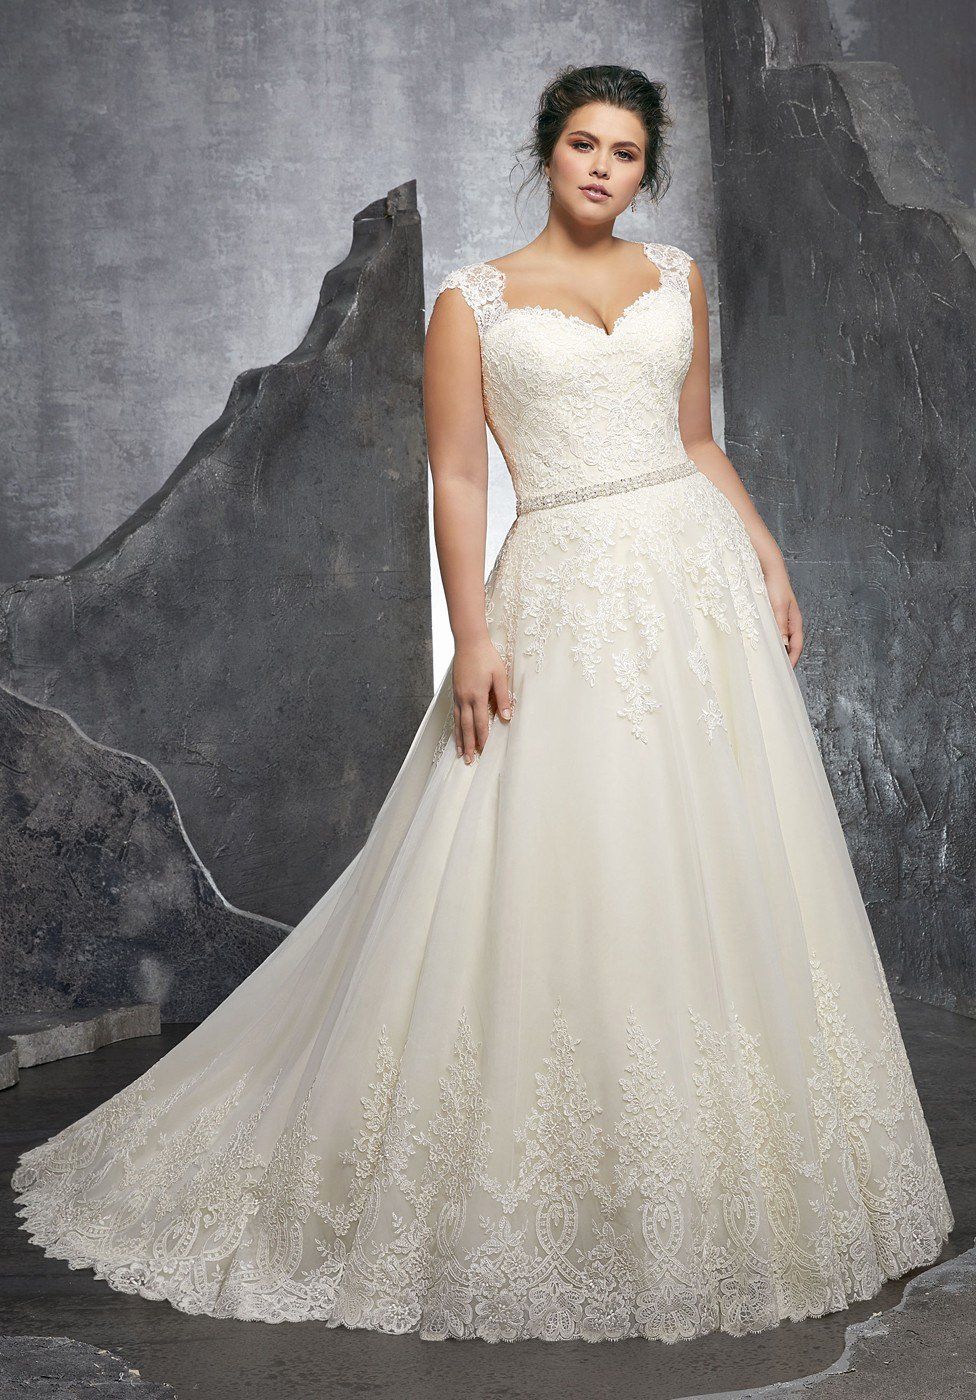 How Much To Wedding Dress Alterations Cost : How Much Does ...